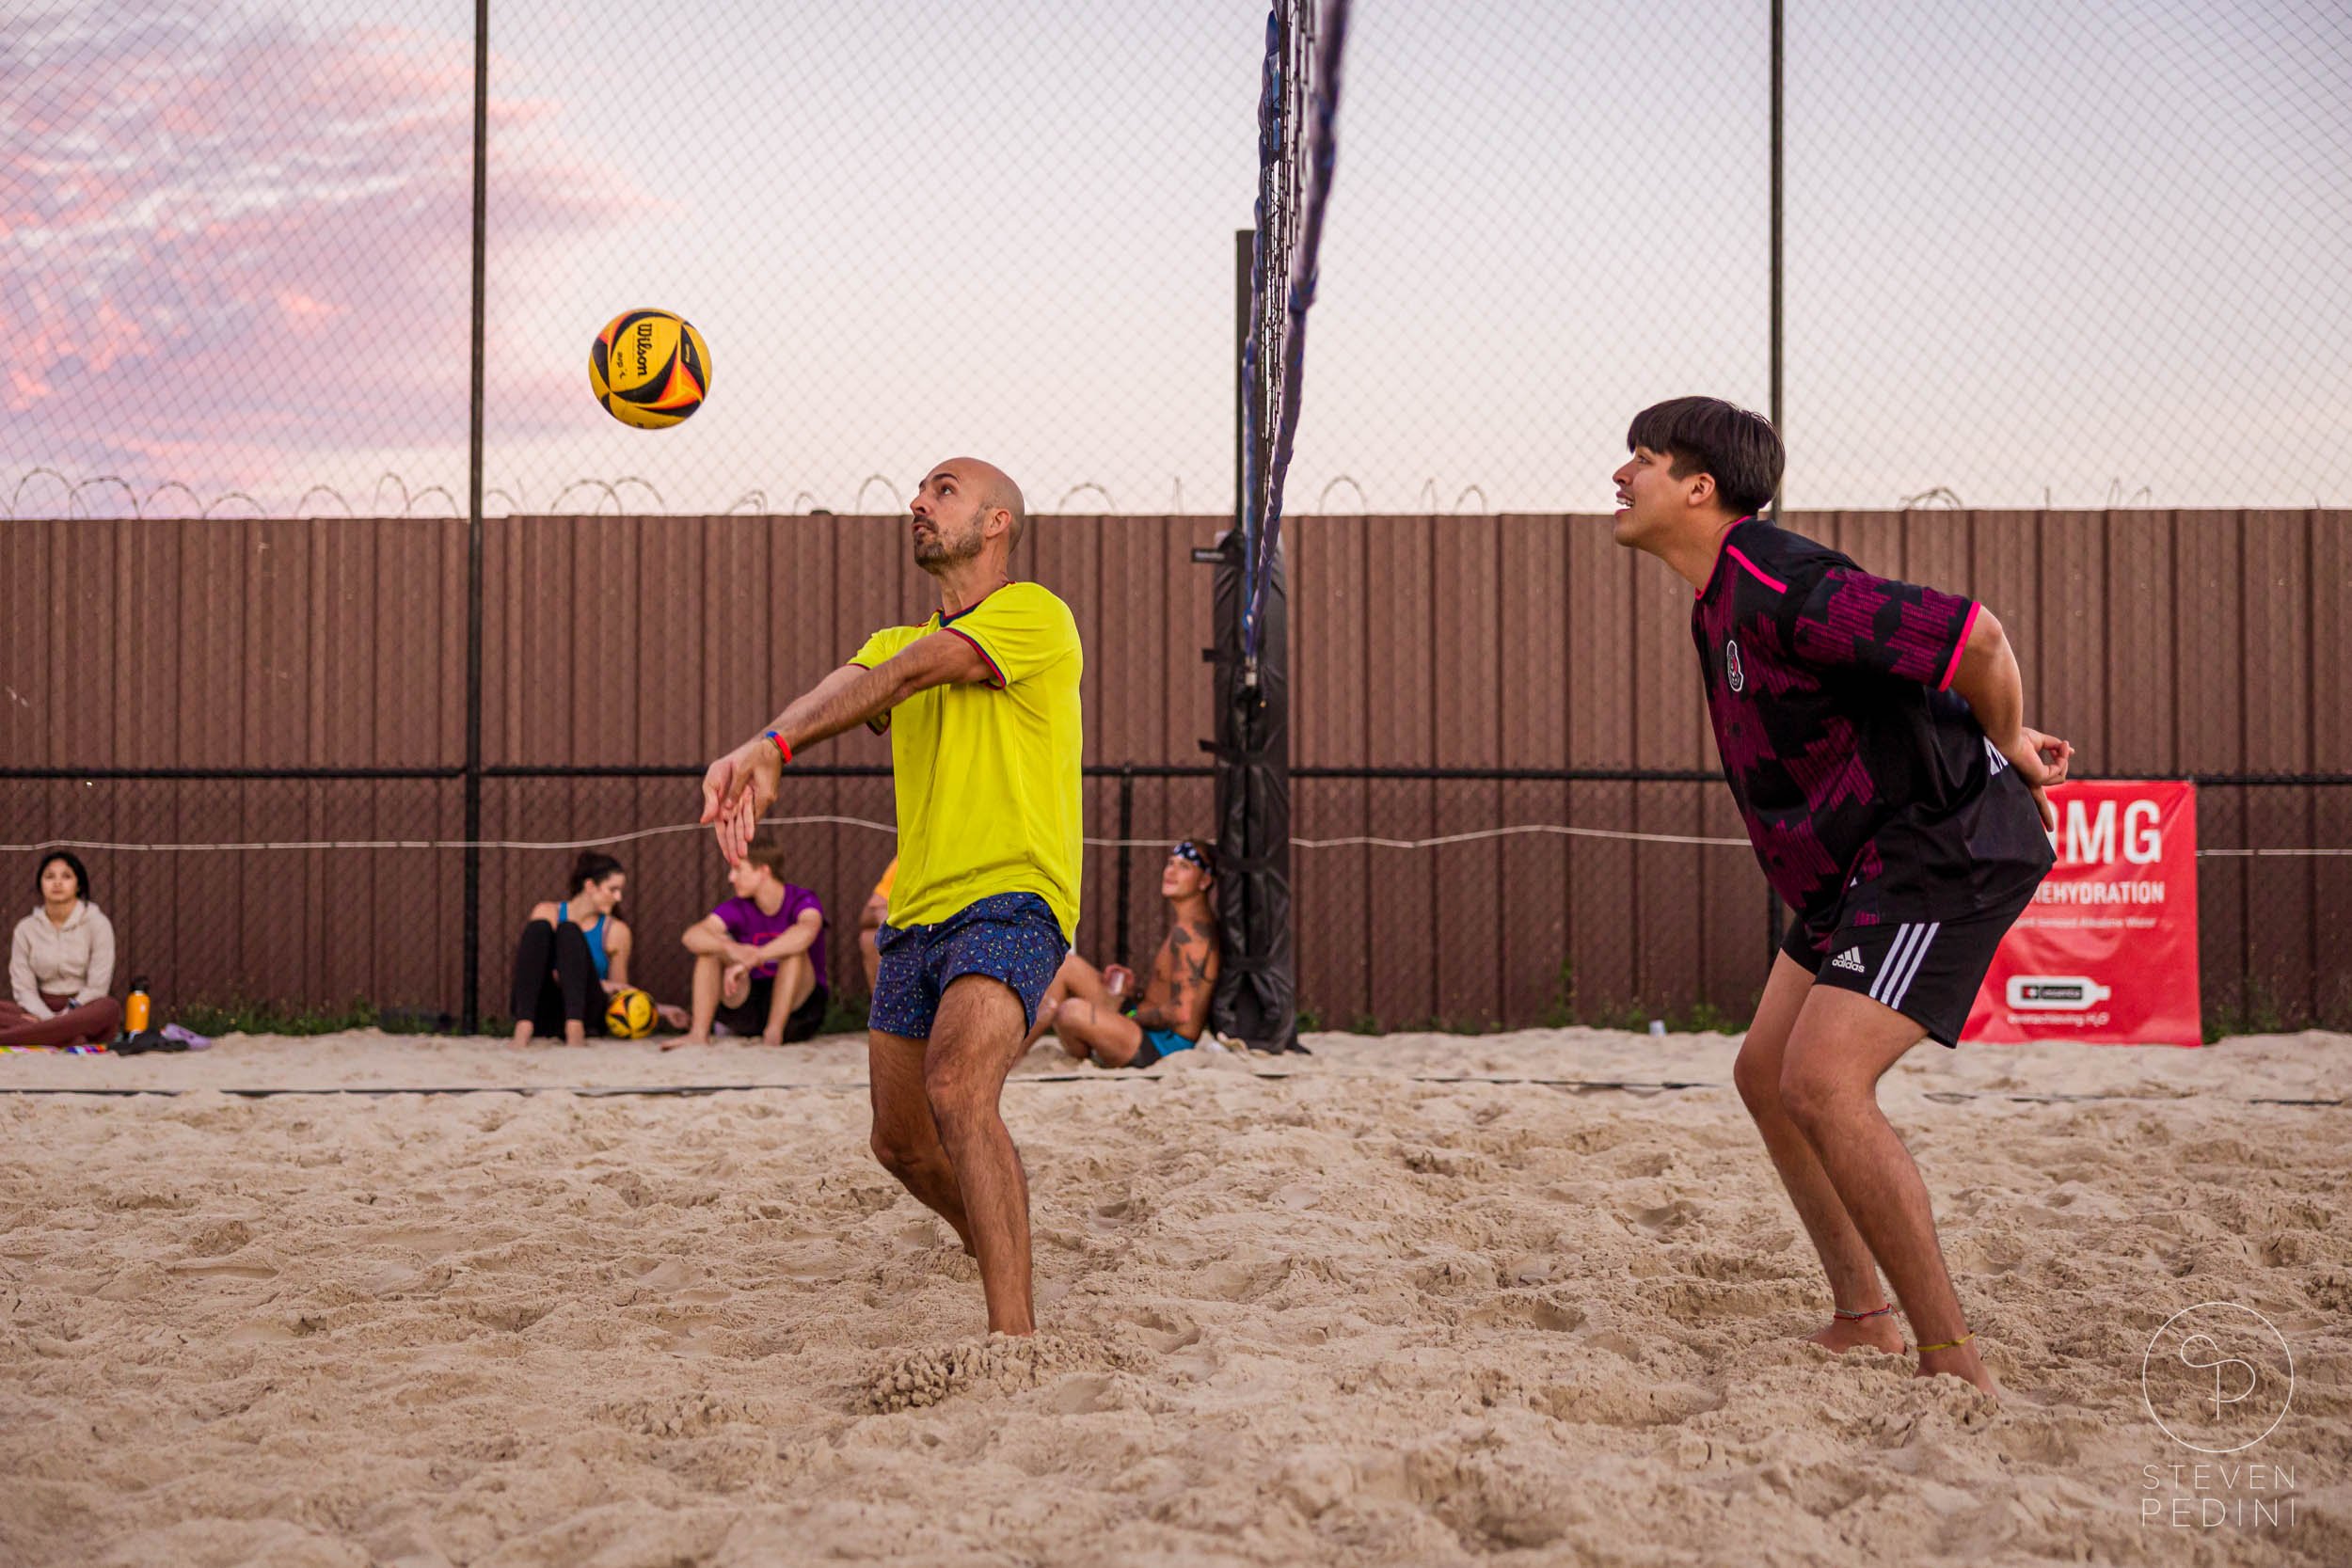 Steven Pedini Photography - Bumpy Pickle - Sand Volleyball - Houston TX - World Cup of Volleyball - 00250.jpg